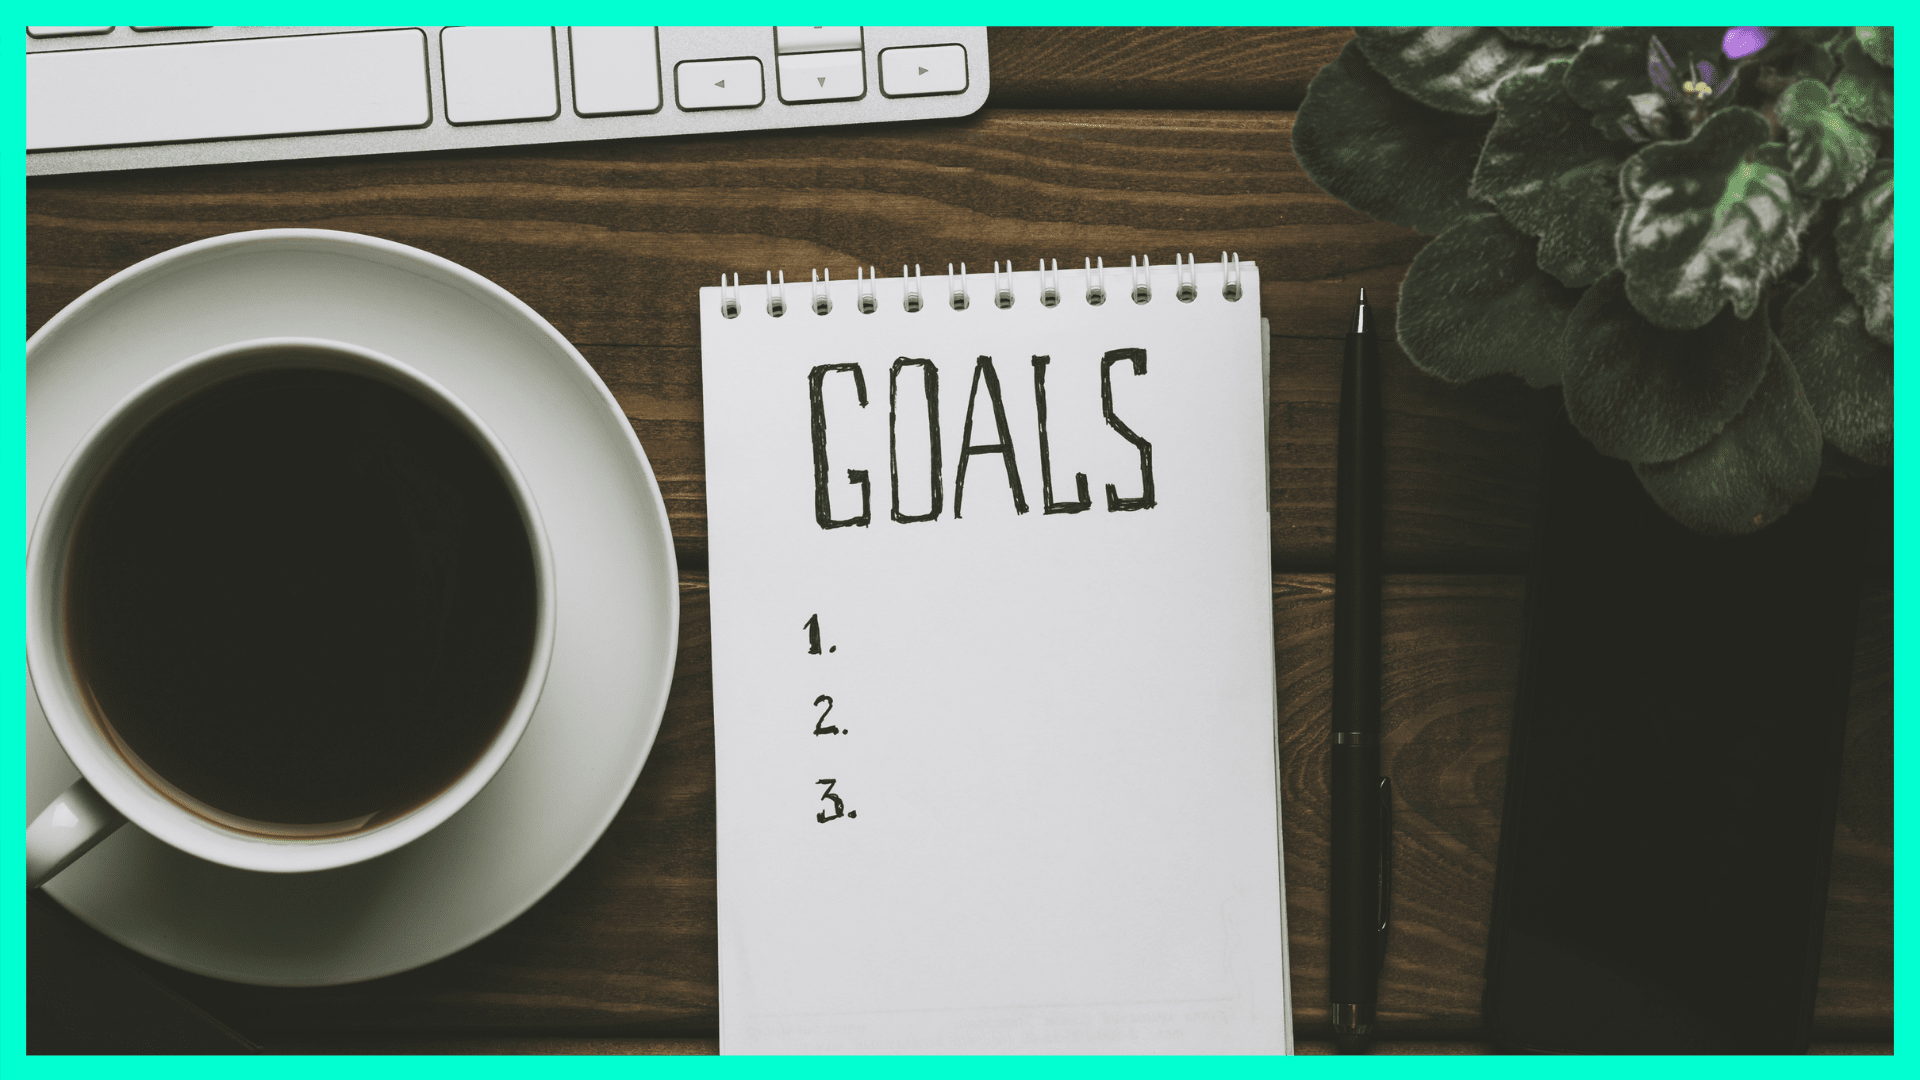 a notepad that says "goals" next to a cup of coffee